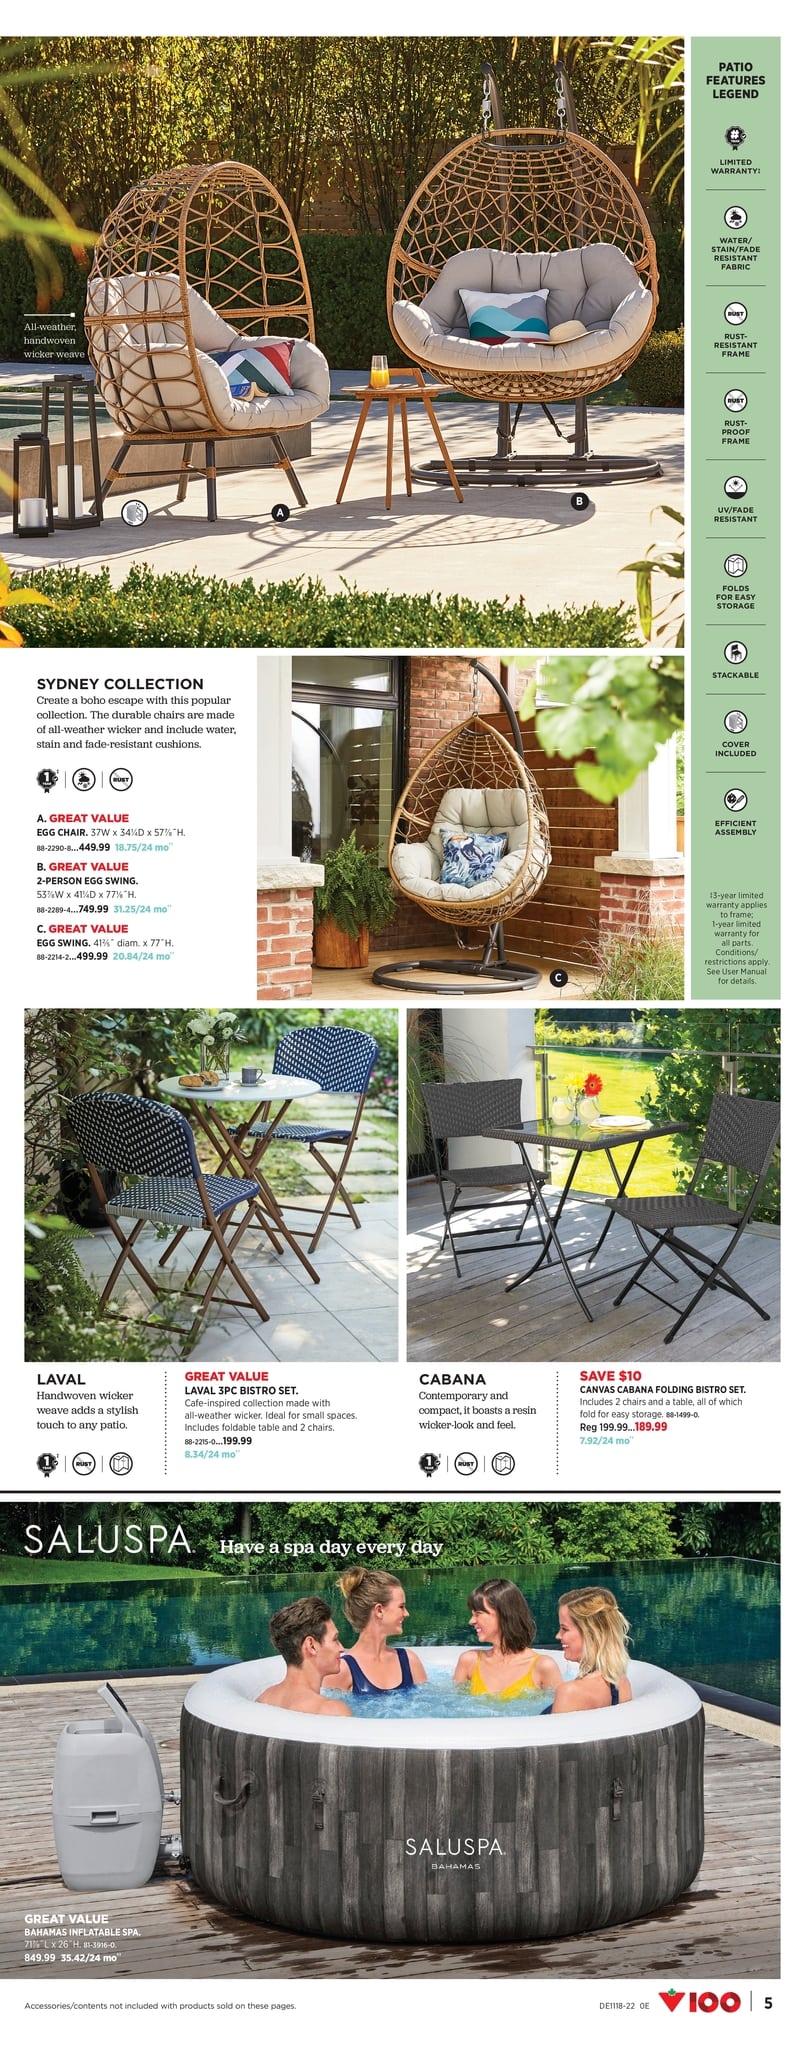 Canadian Tire - Spring Inspirations - Page 5